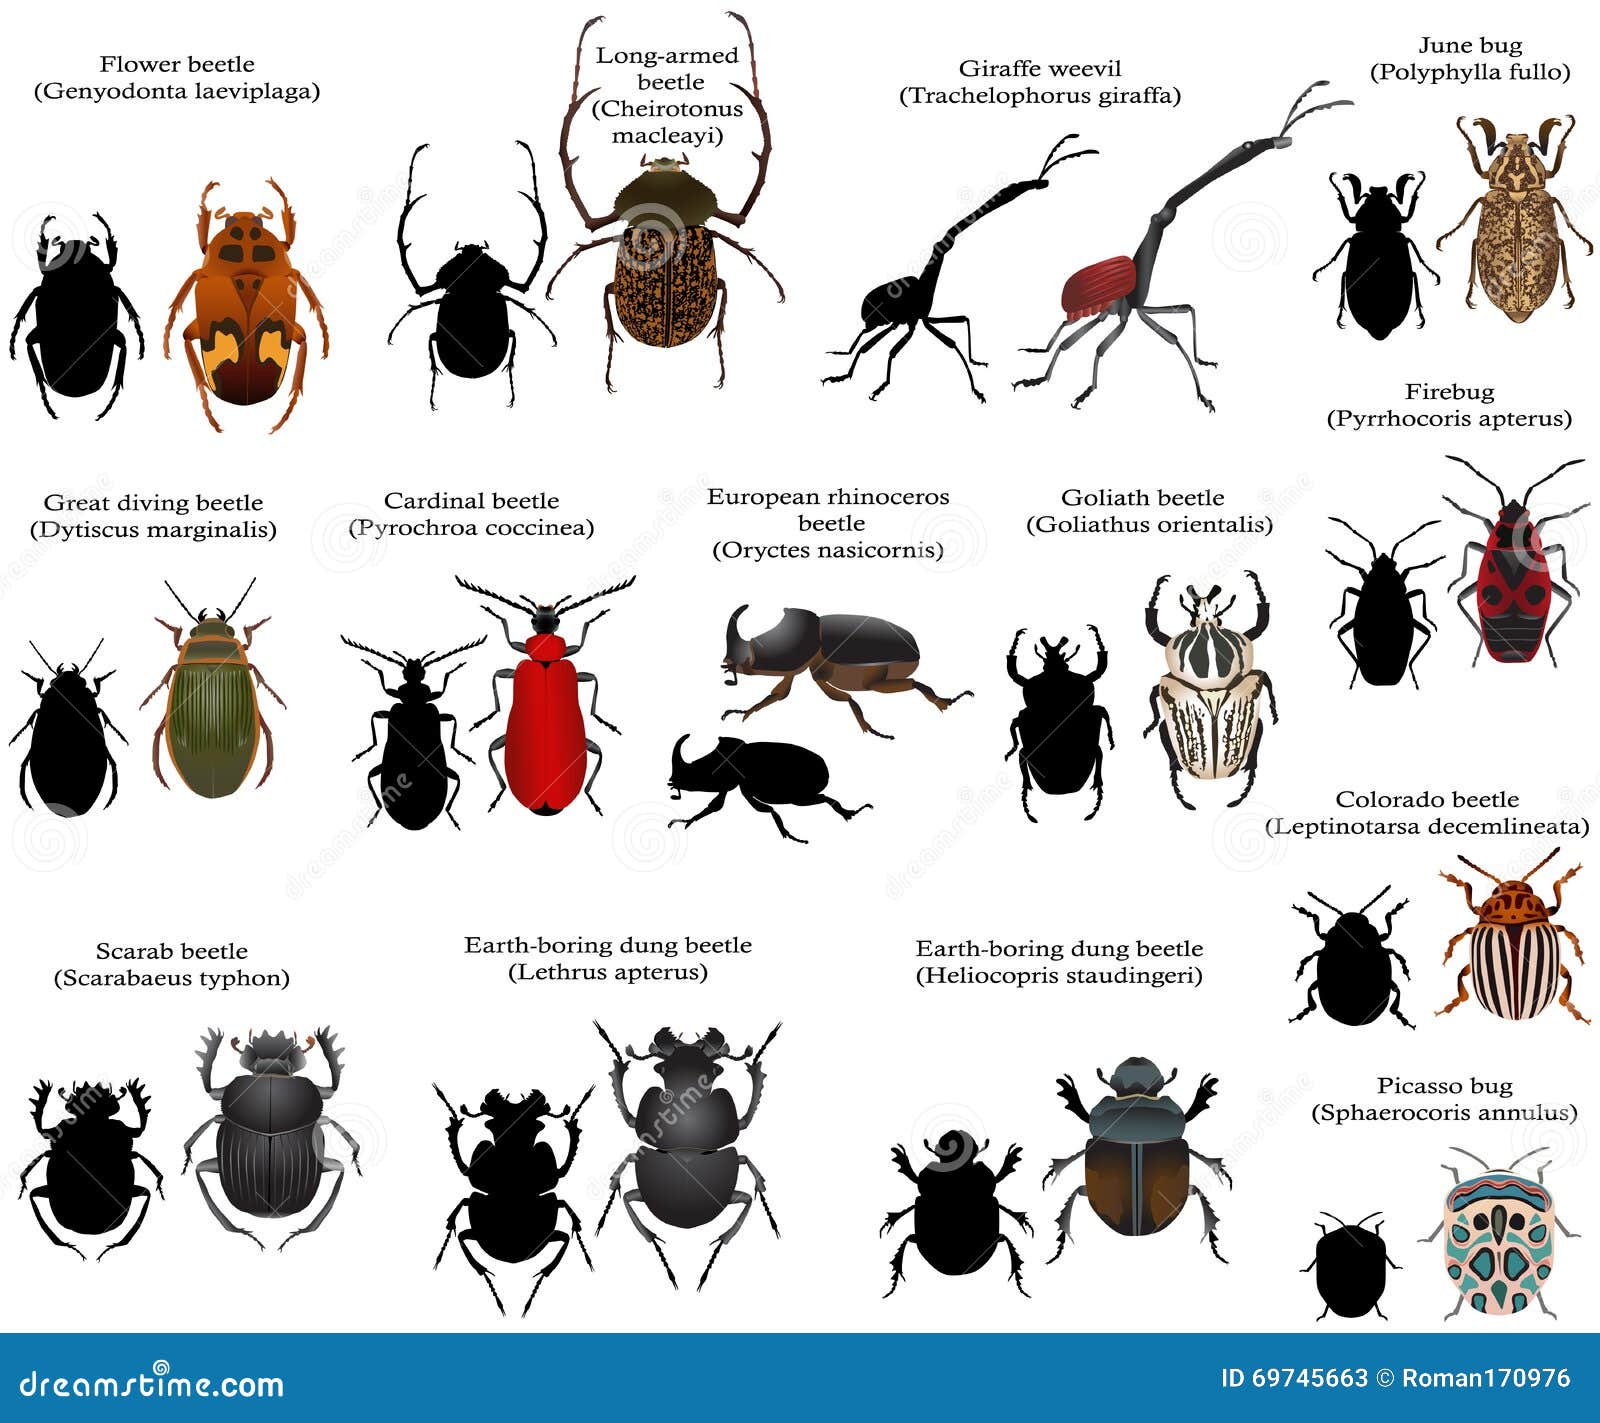 List 96+ Images beetle species list with pictures Full HD, 2k, 4k